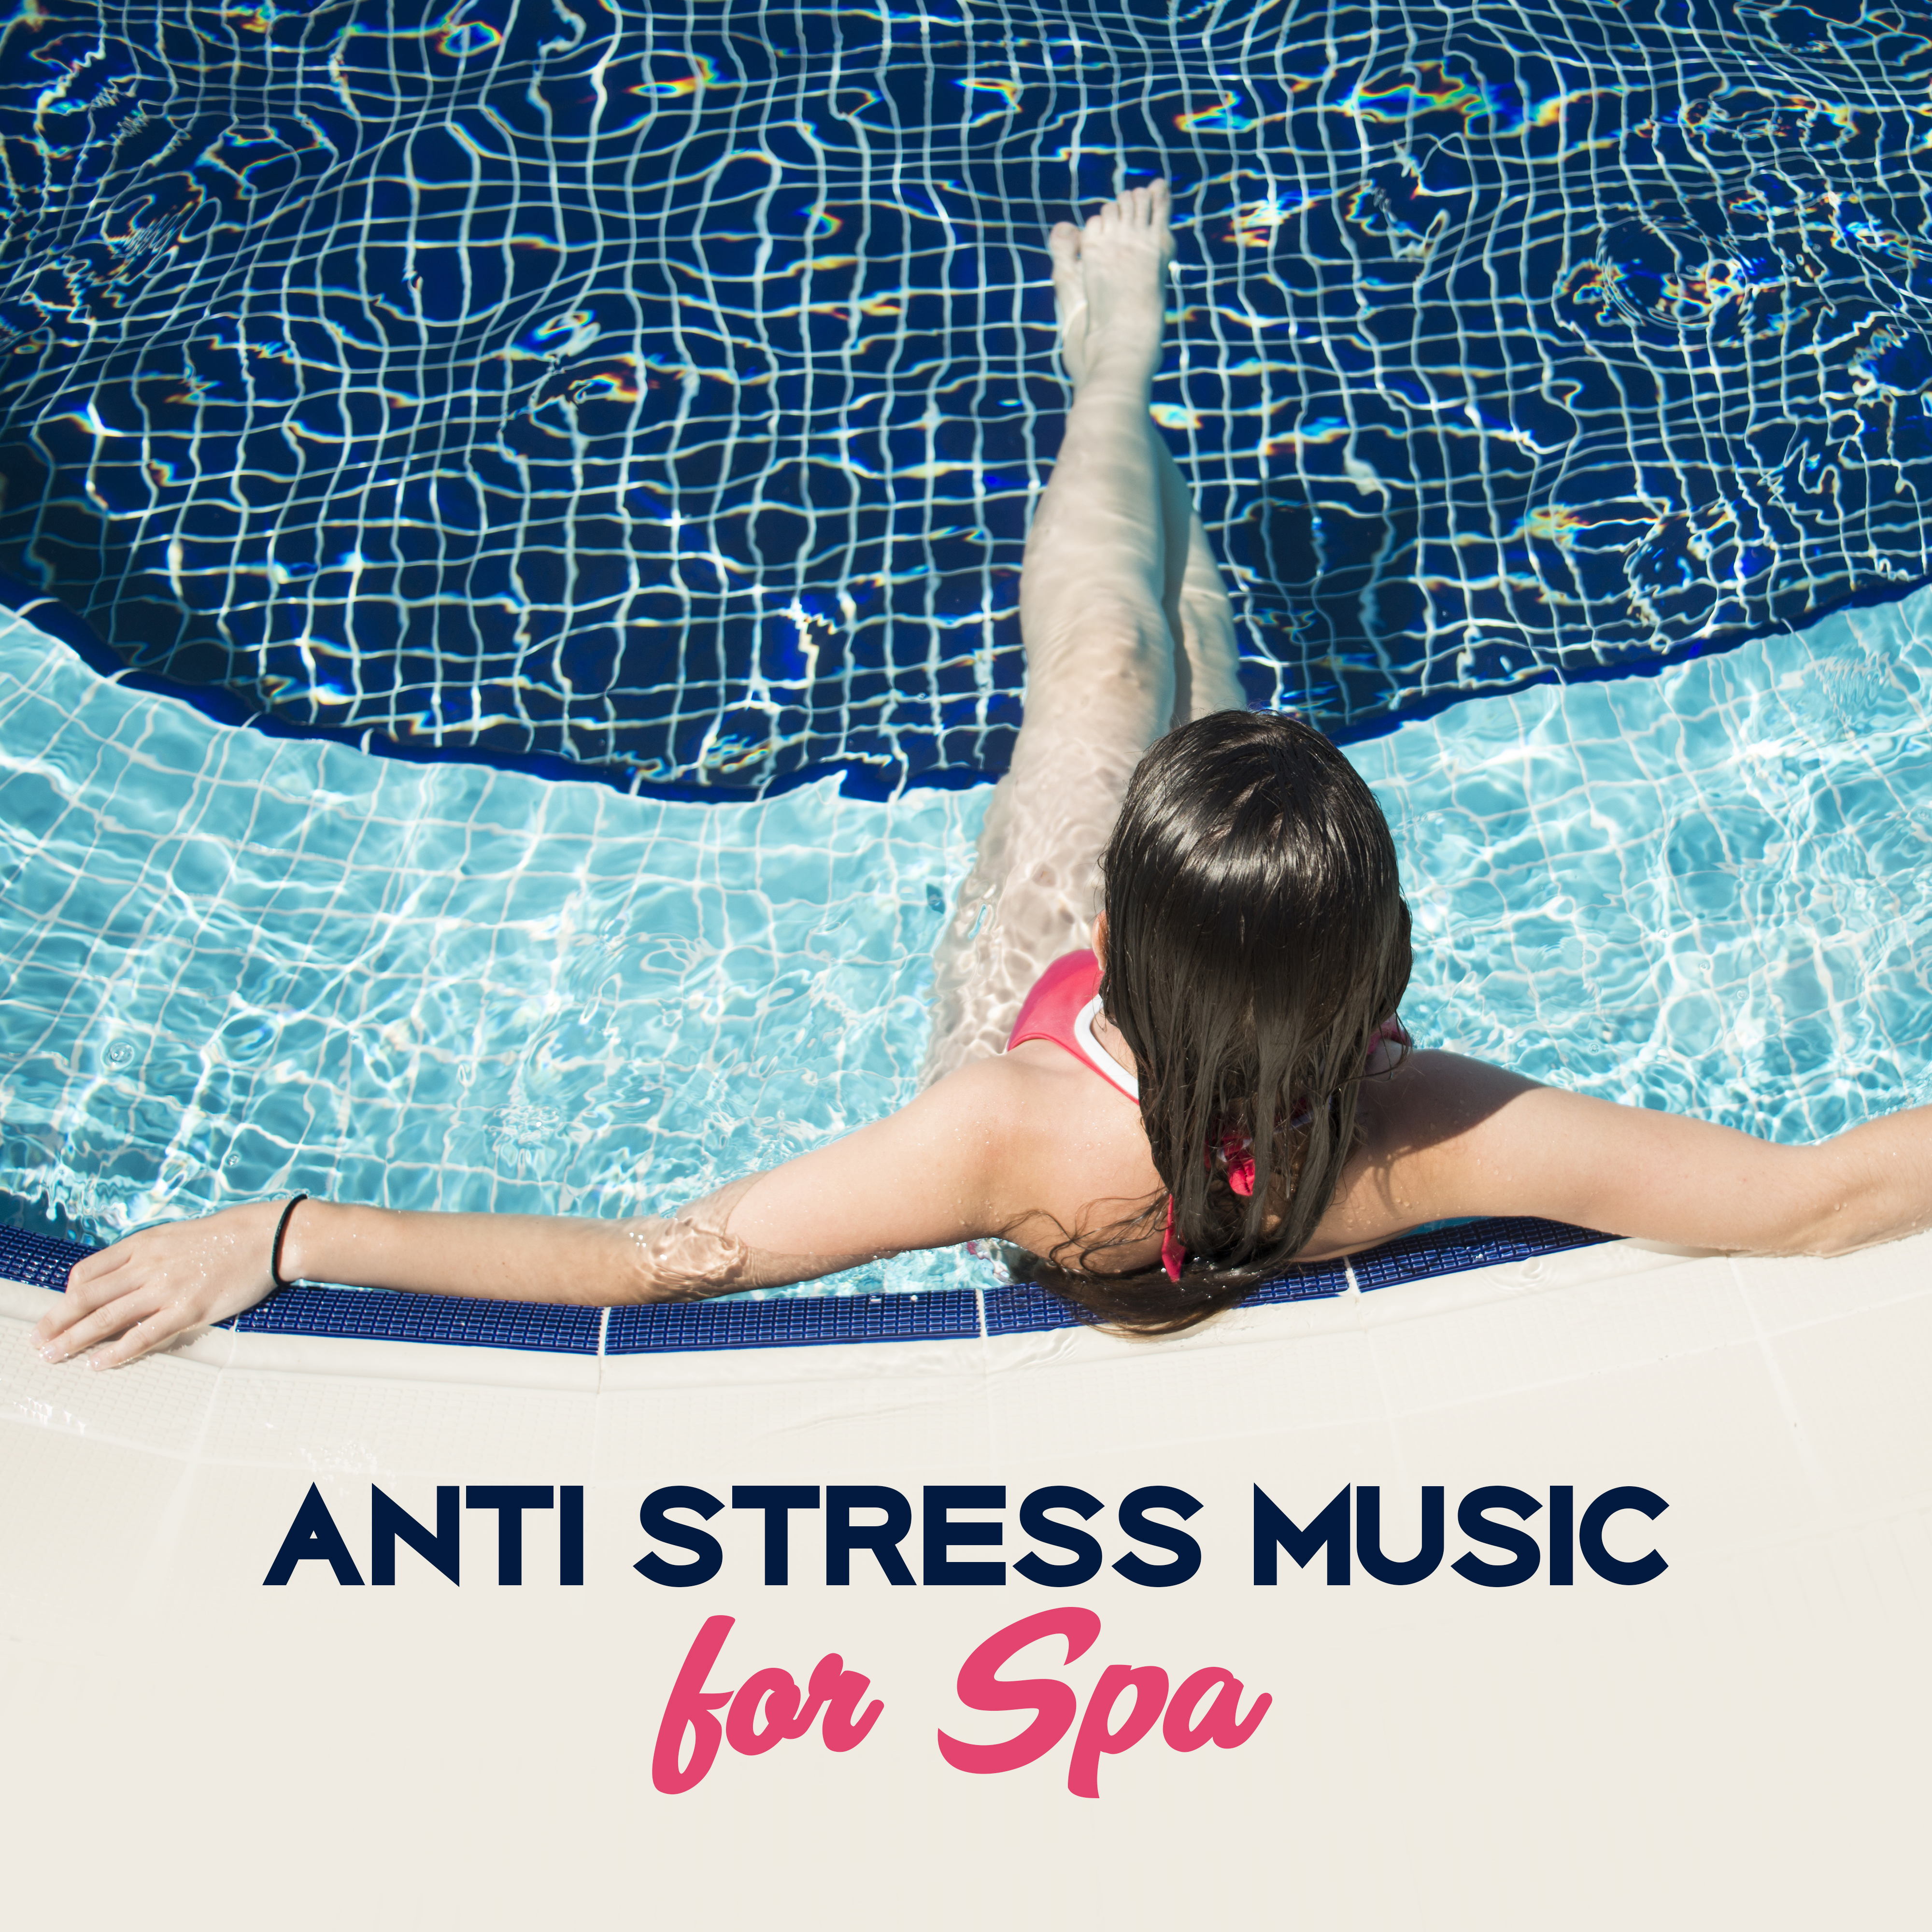 Anti Stress Music for Spa – Deep Massage, Pure Sleep, Bliss Spa, Therapy for Body, Rest